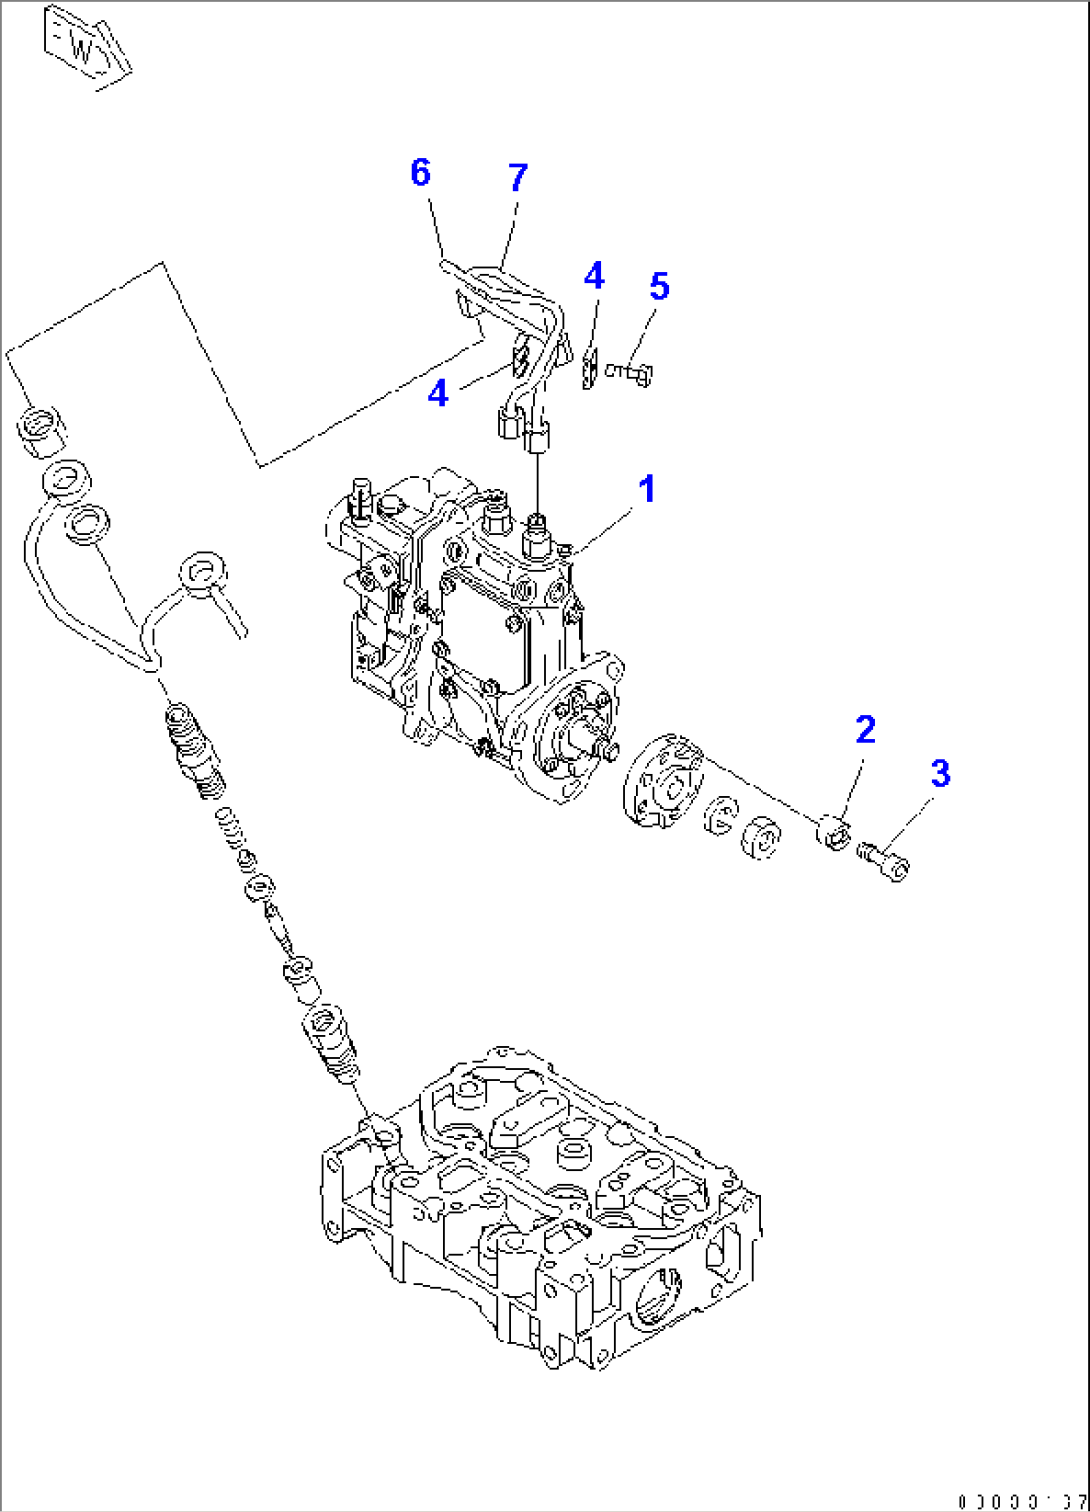 FUEL INJECTION PUMP AND PIPING